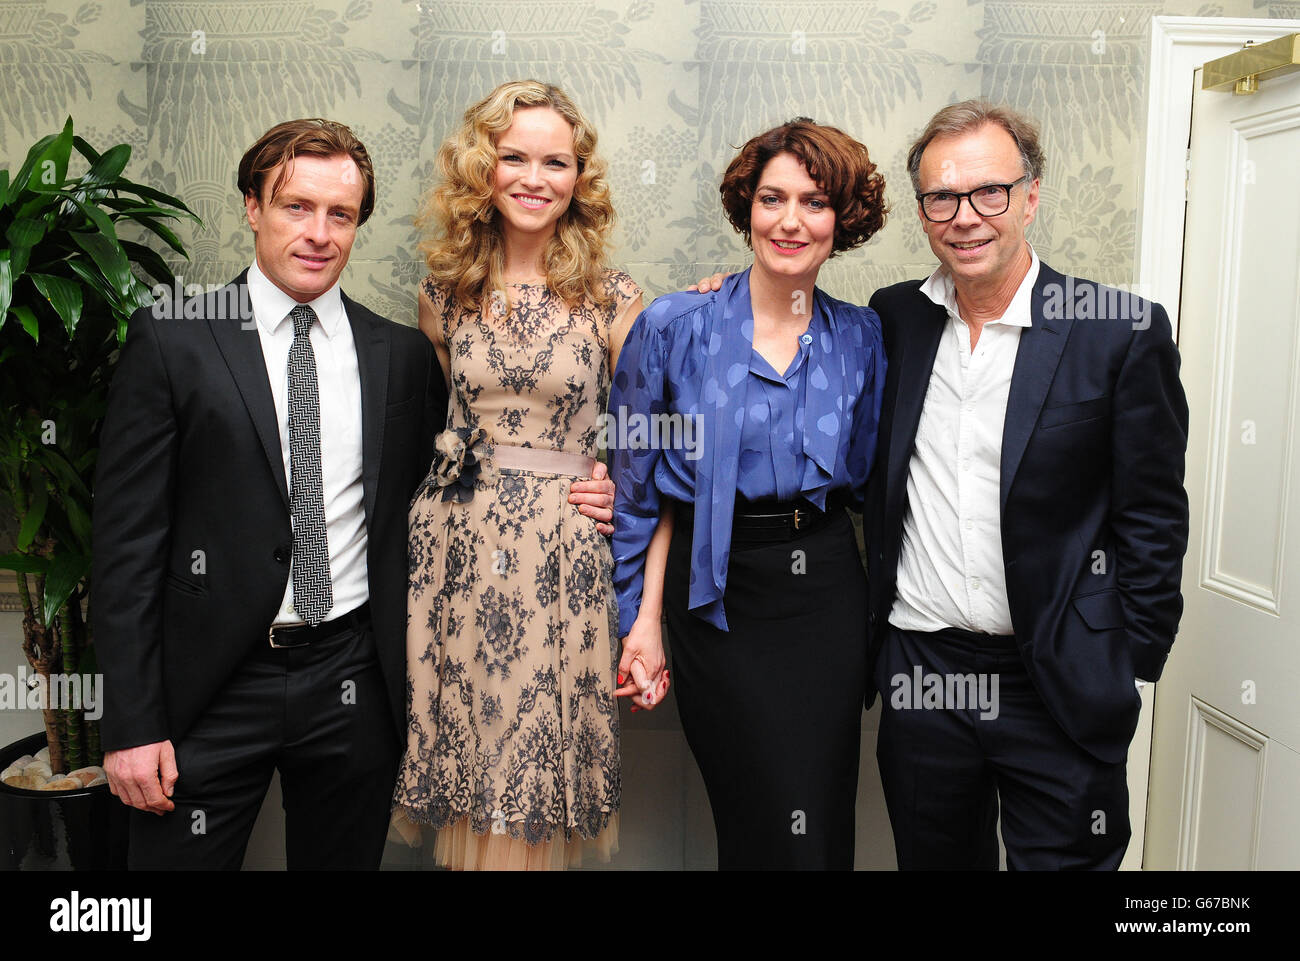 Toby Stephens a ttends the Woman of the Year Awards 2013 at